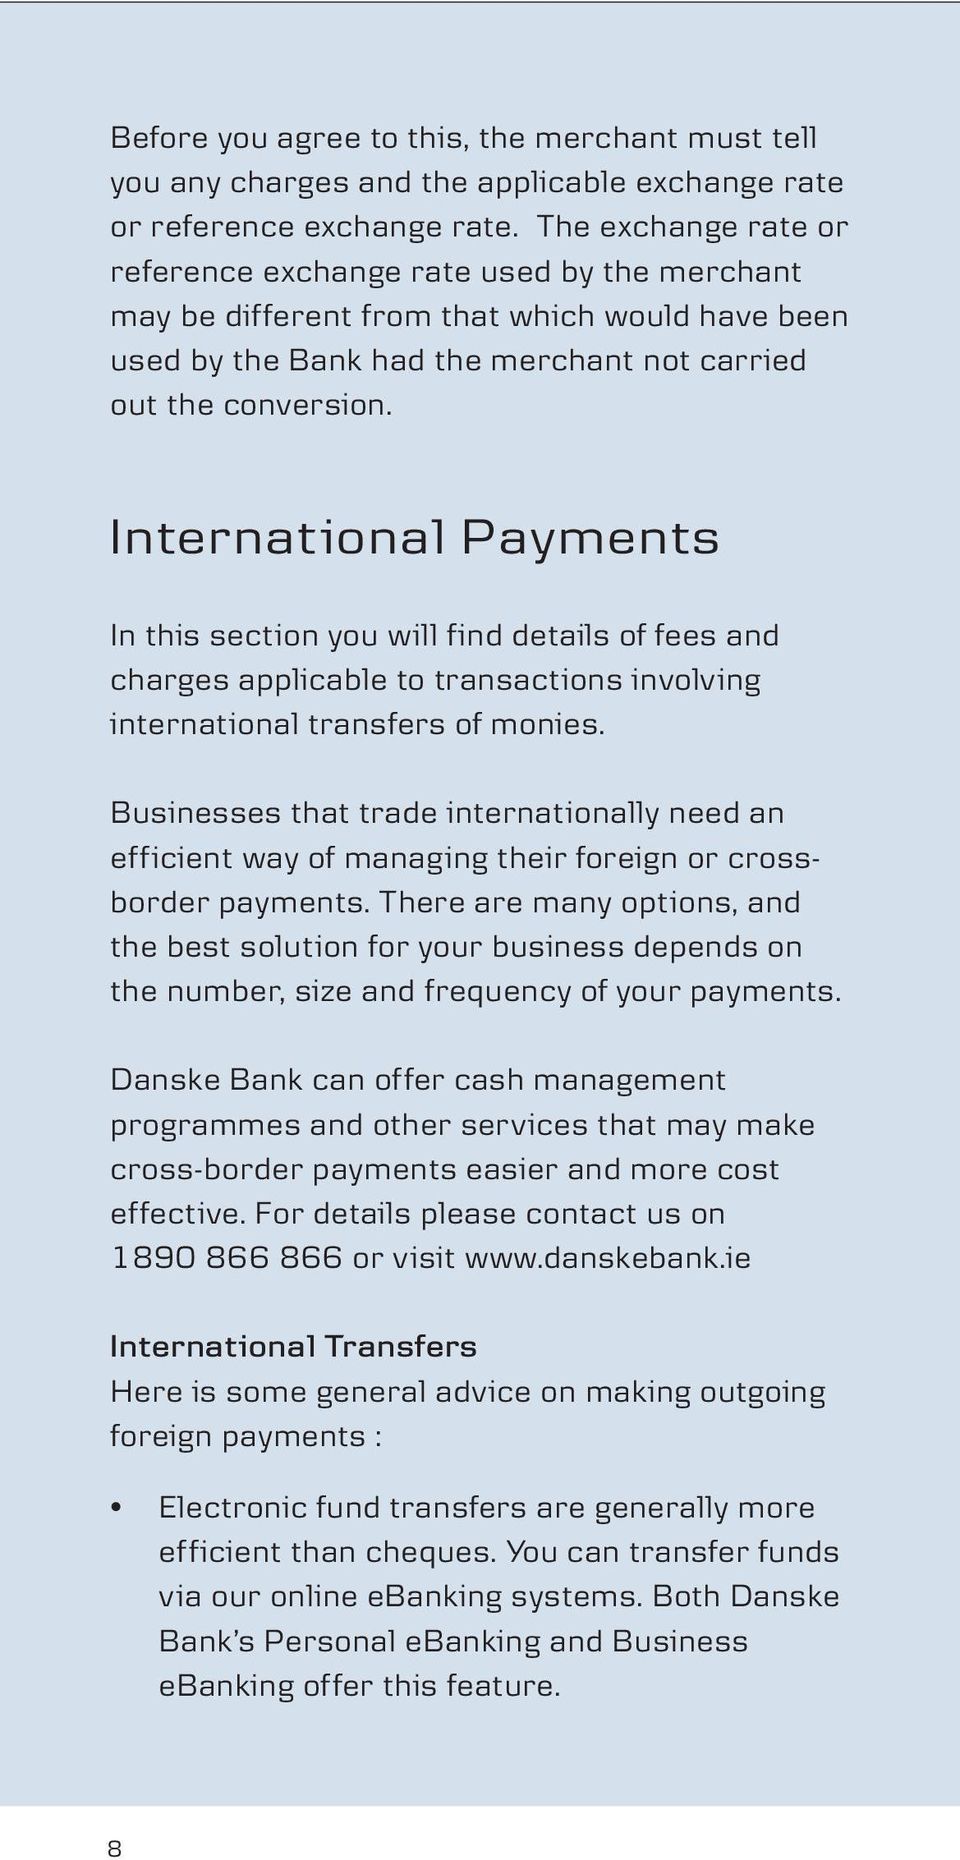 Internat ional Payments In this section you will find details of fees and charges applicable to transactions involving international transfers of monies.